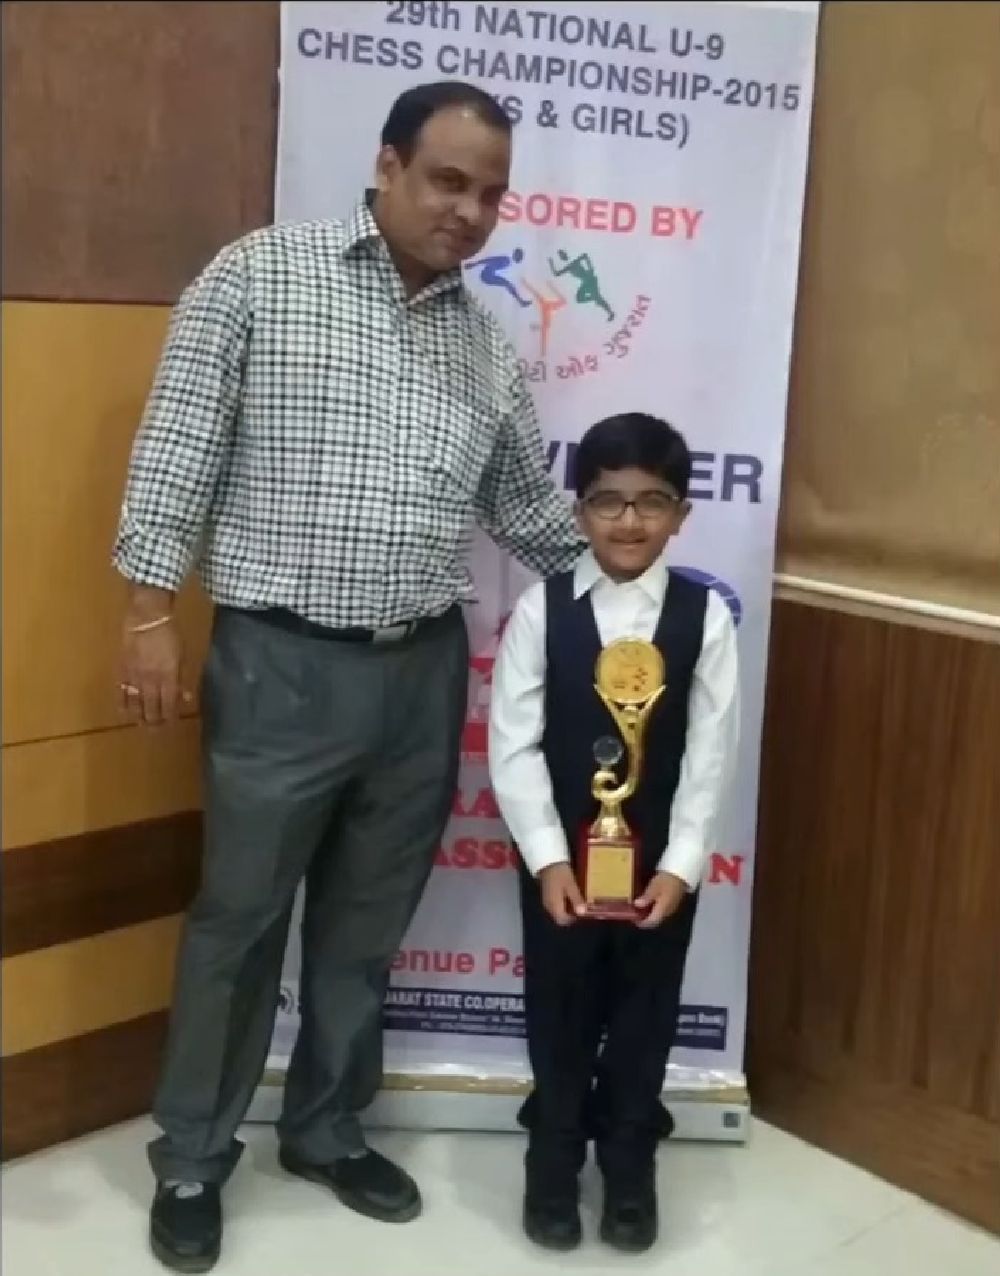 Chess.com - India on X: 12-year-old Aditya Mittal 🇮🇳 became India's  latest International Master when he scored his three IM norms in  consecutive tournaments! Aditya's rating also flew from 2215 to 2457